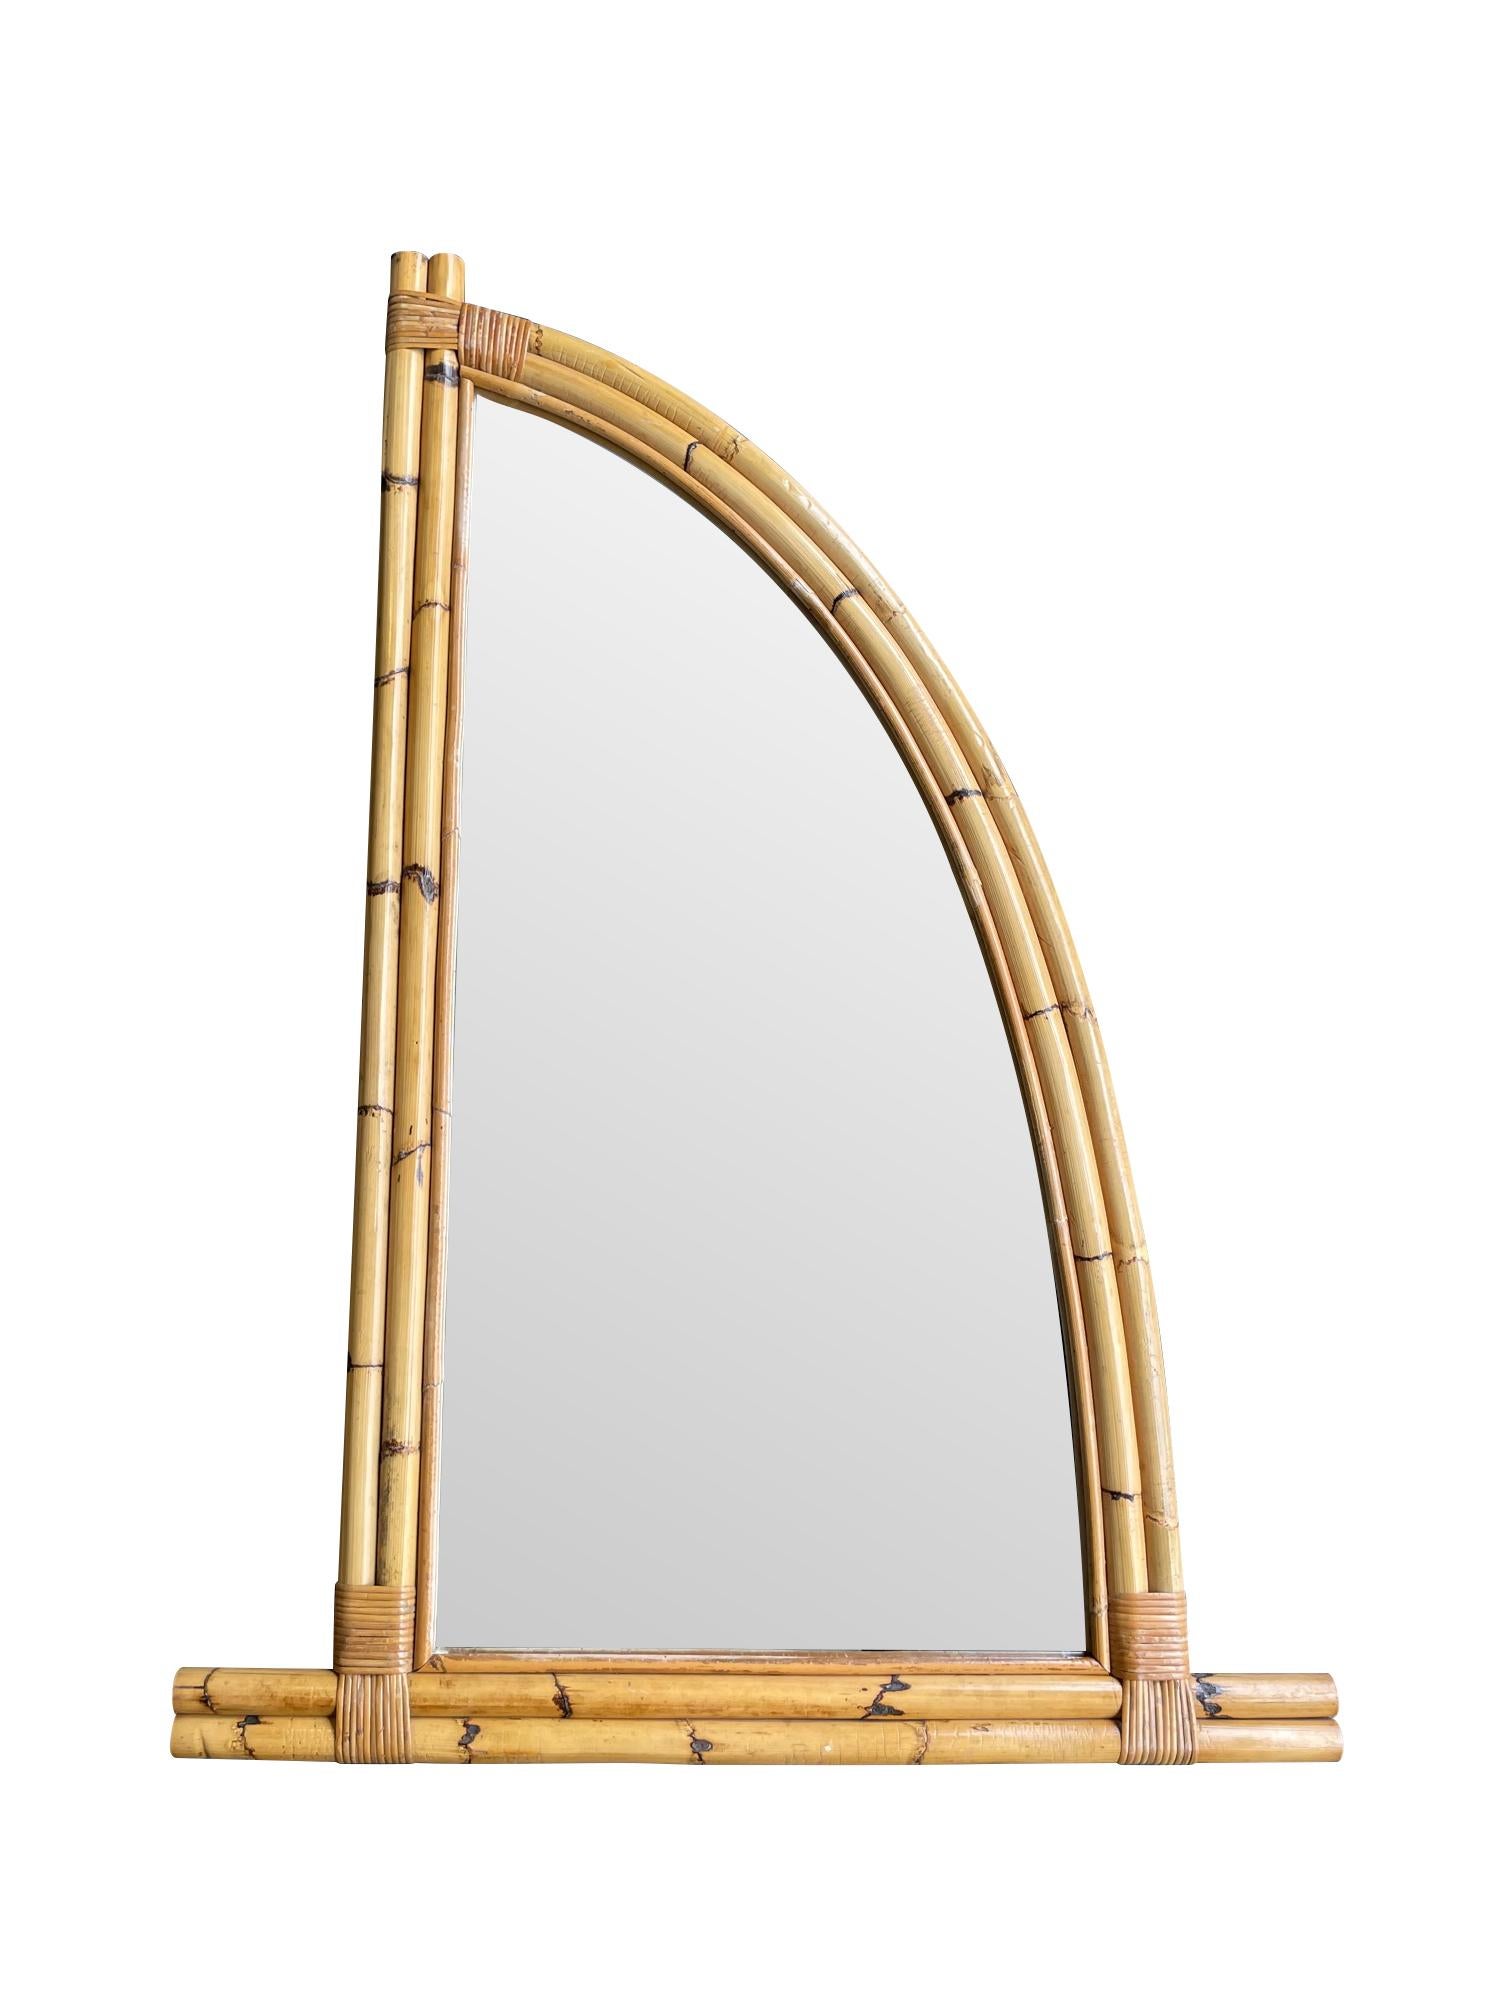 A pair of interesting 1970s Italian curved bamboo mirrors which could be used for a variety of uses.